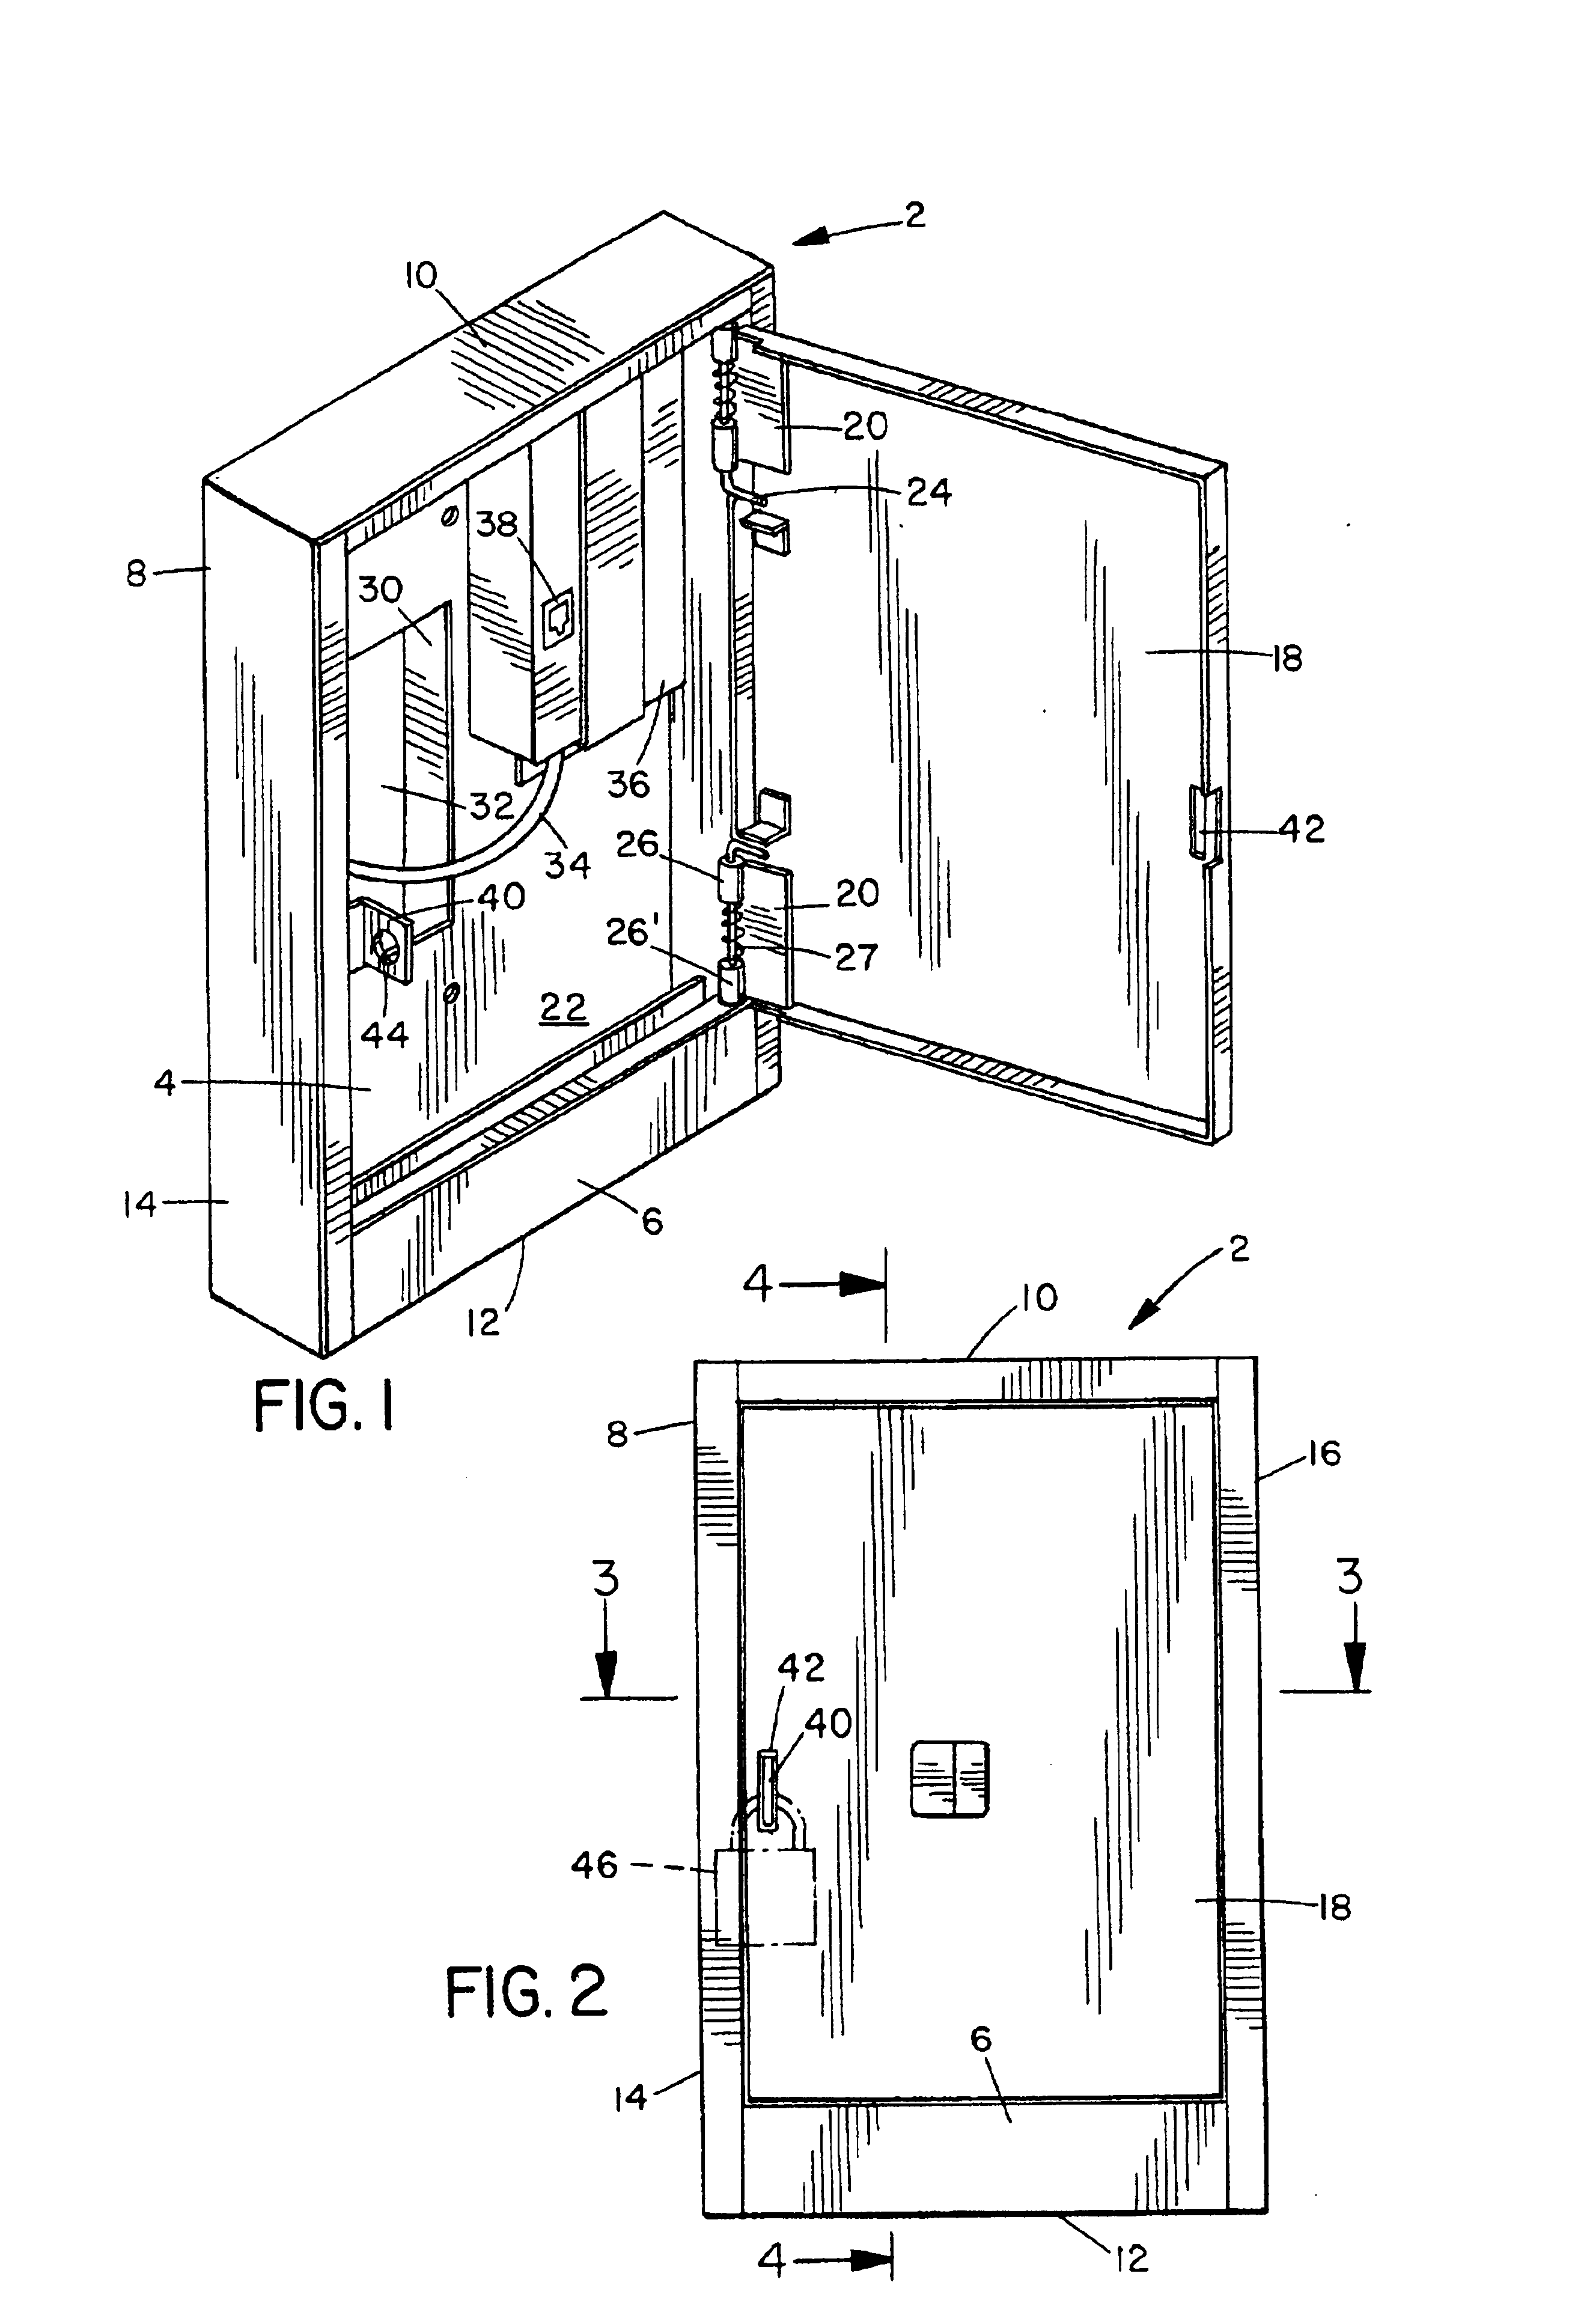 Secure enclosure for access to cabled systems